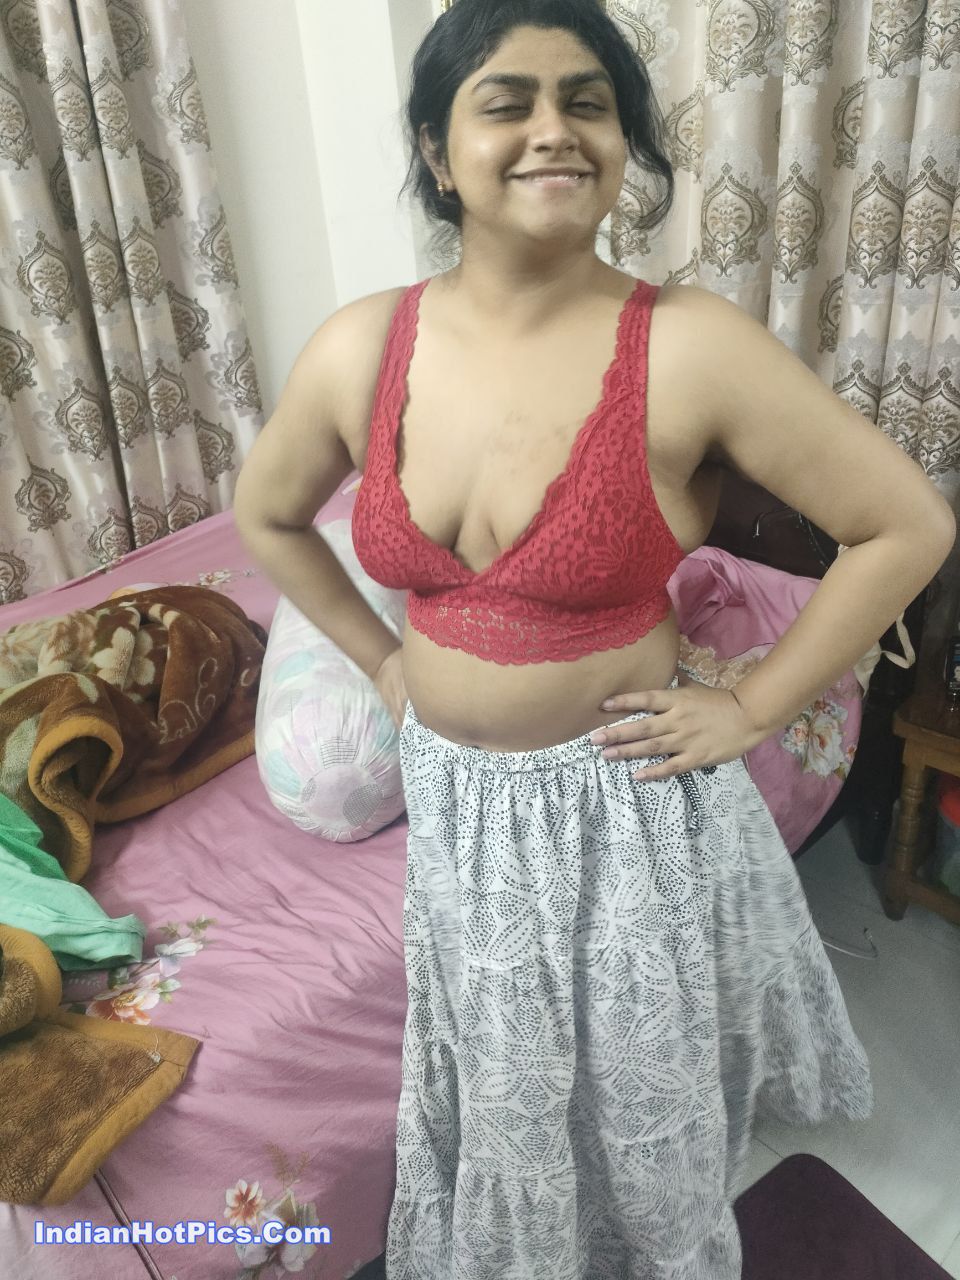 Indian Wife Nude And Sex Honeymoon Photos picture picture